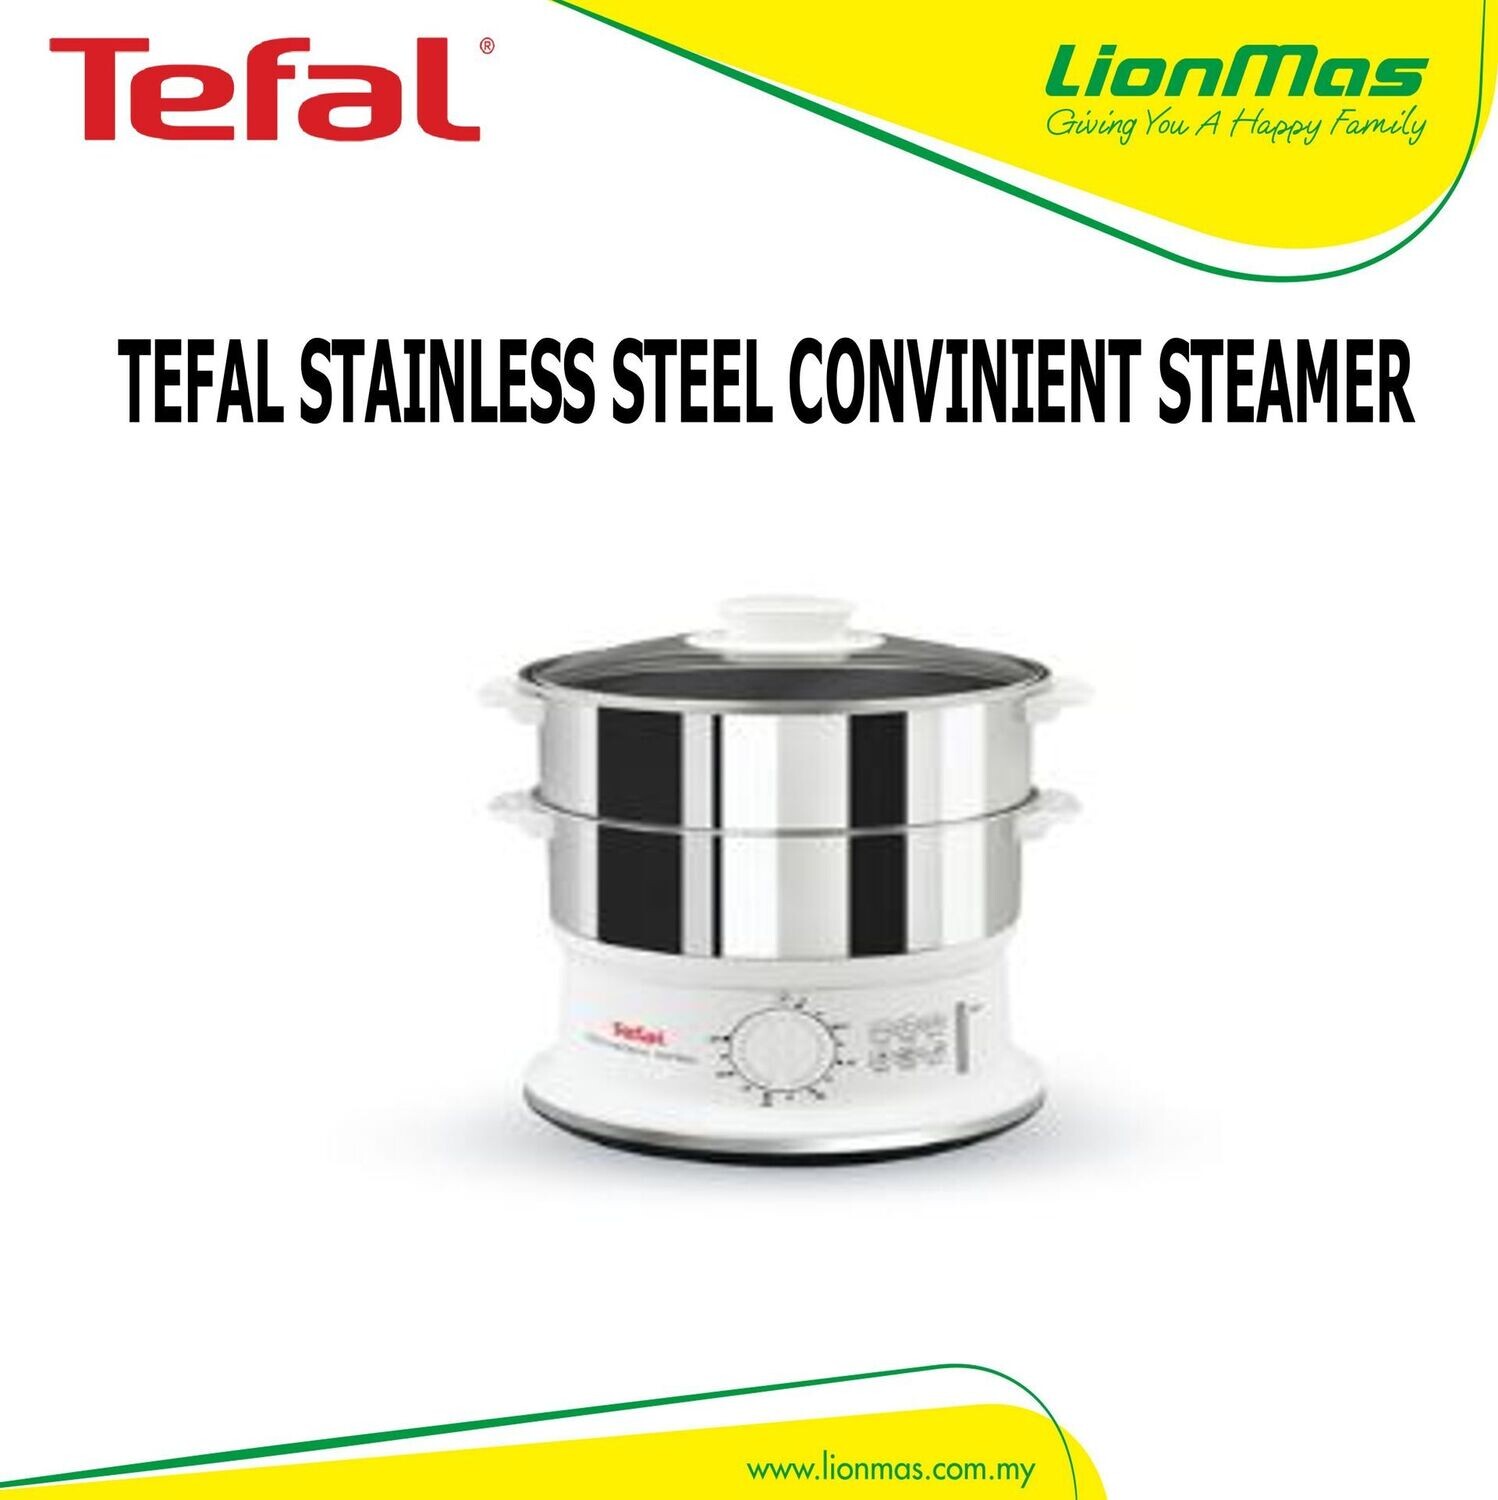 TEFAL STAINLESS STEEL CONVENIENT STEAMER VC-1451